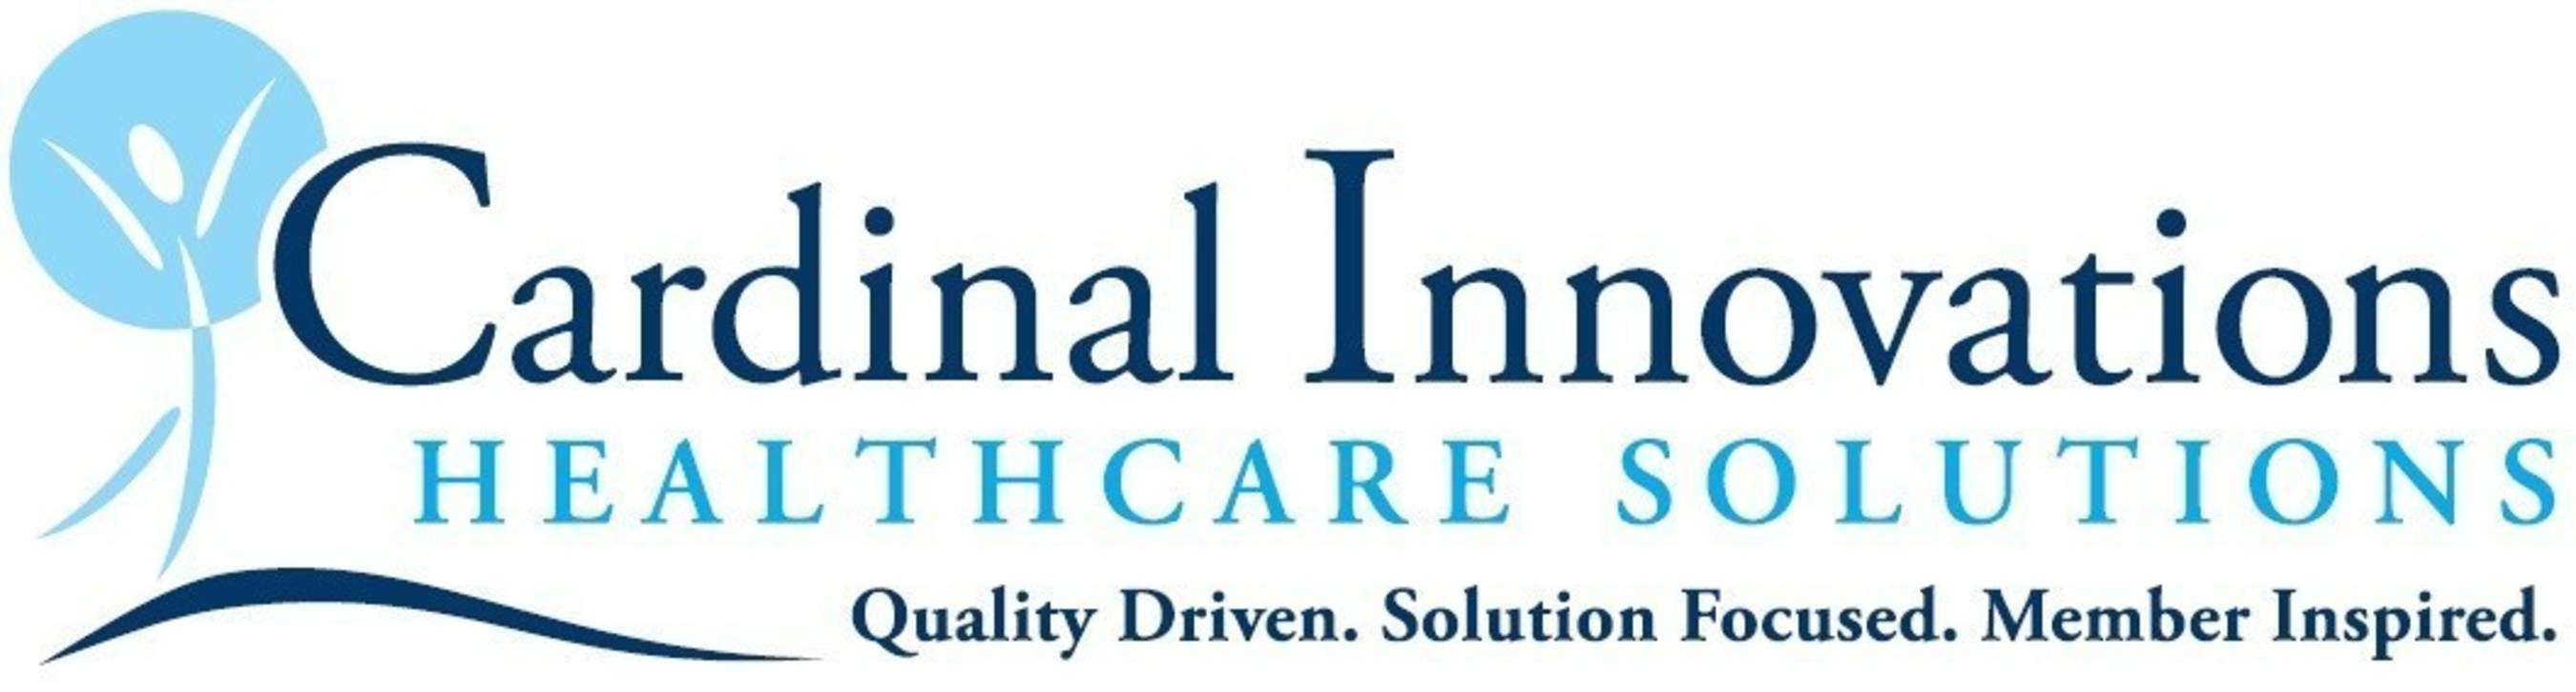 Visit www.accessforoutcomes.com - to learn more about Cardinal Innovations, Ieso Digital Health and M3 Information and our subject matter experts, who will be onsite at NATCON, or follow us on Facebook and Twitter.